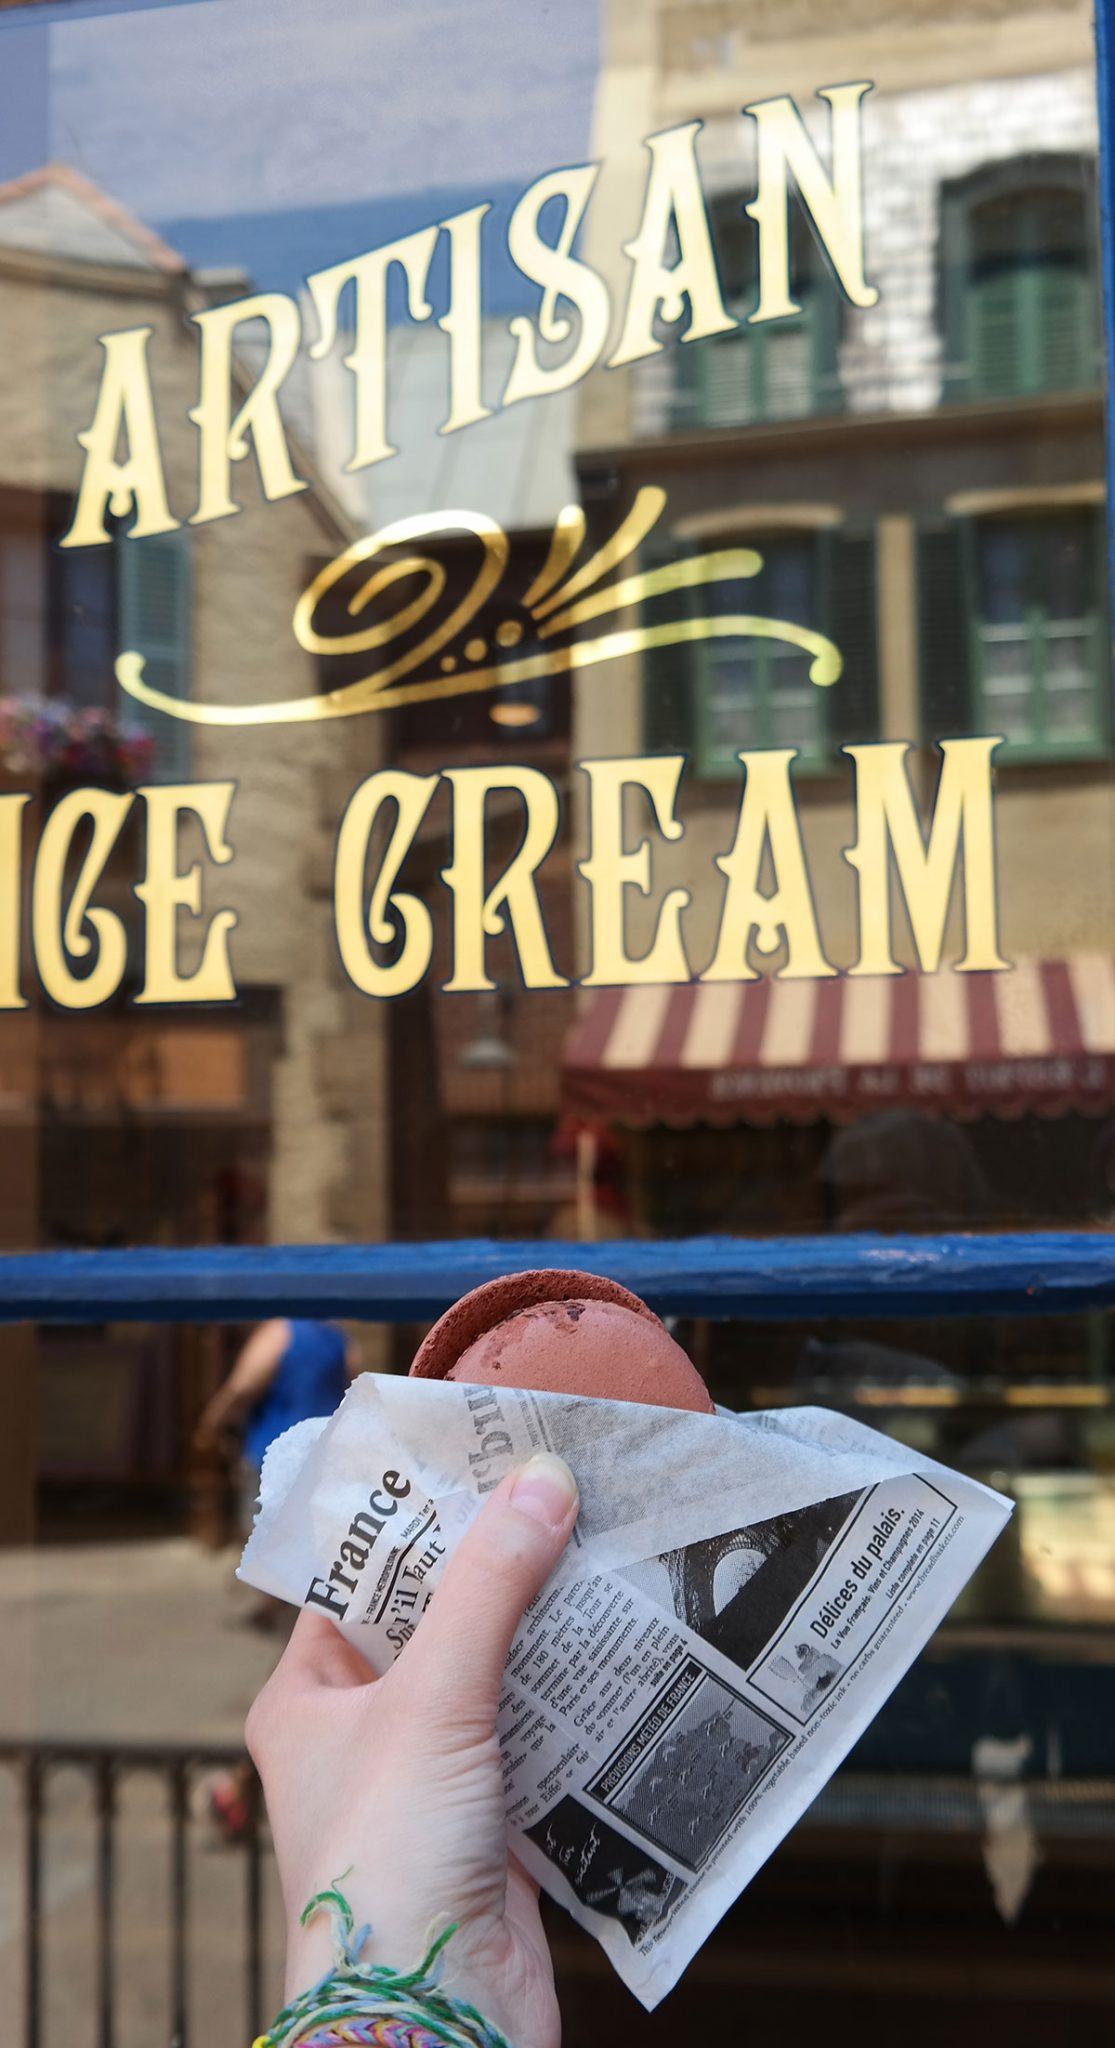 you can find L'Artisan des Glaces, an ice cream shop with 16 different flavors of ice cream (and sorbet)